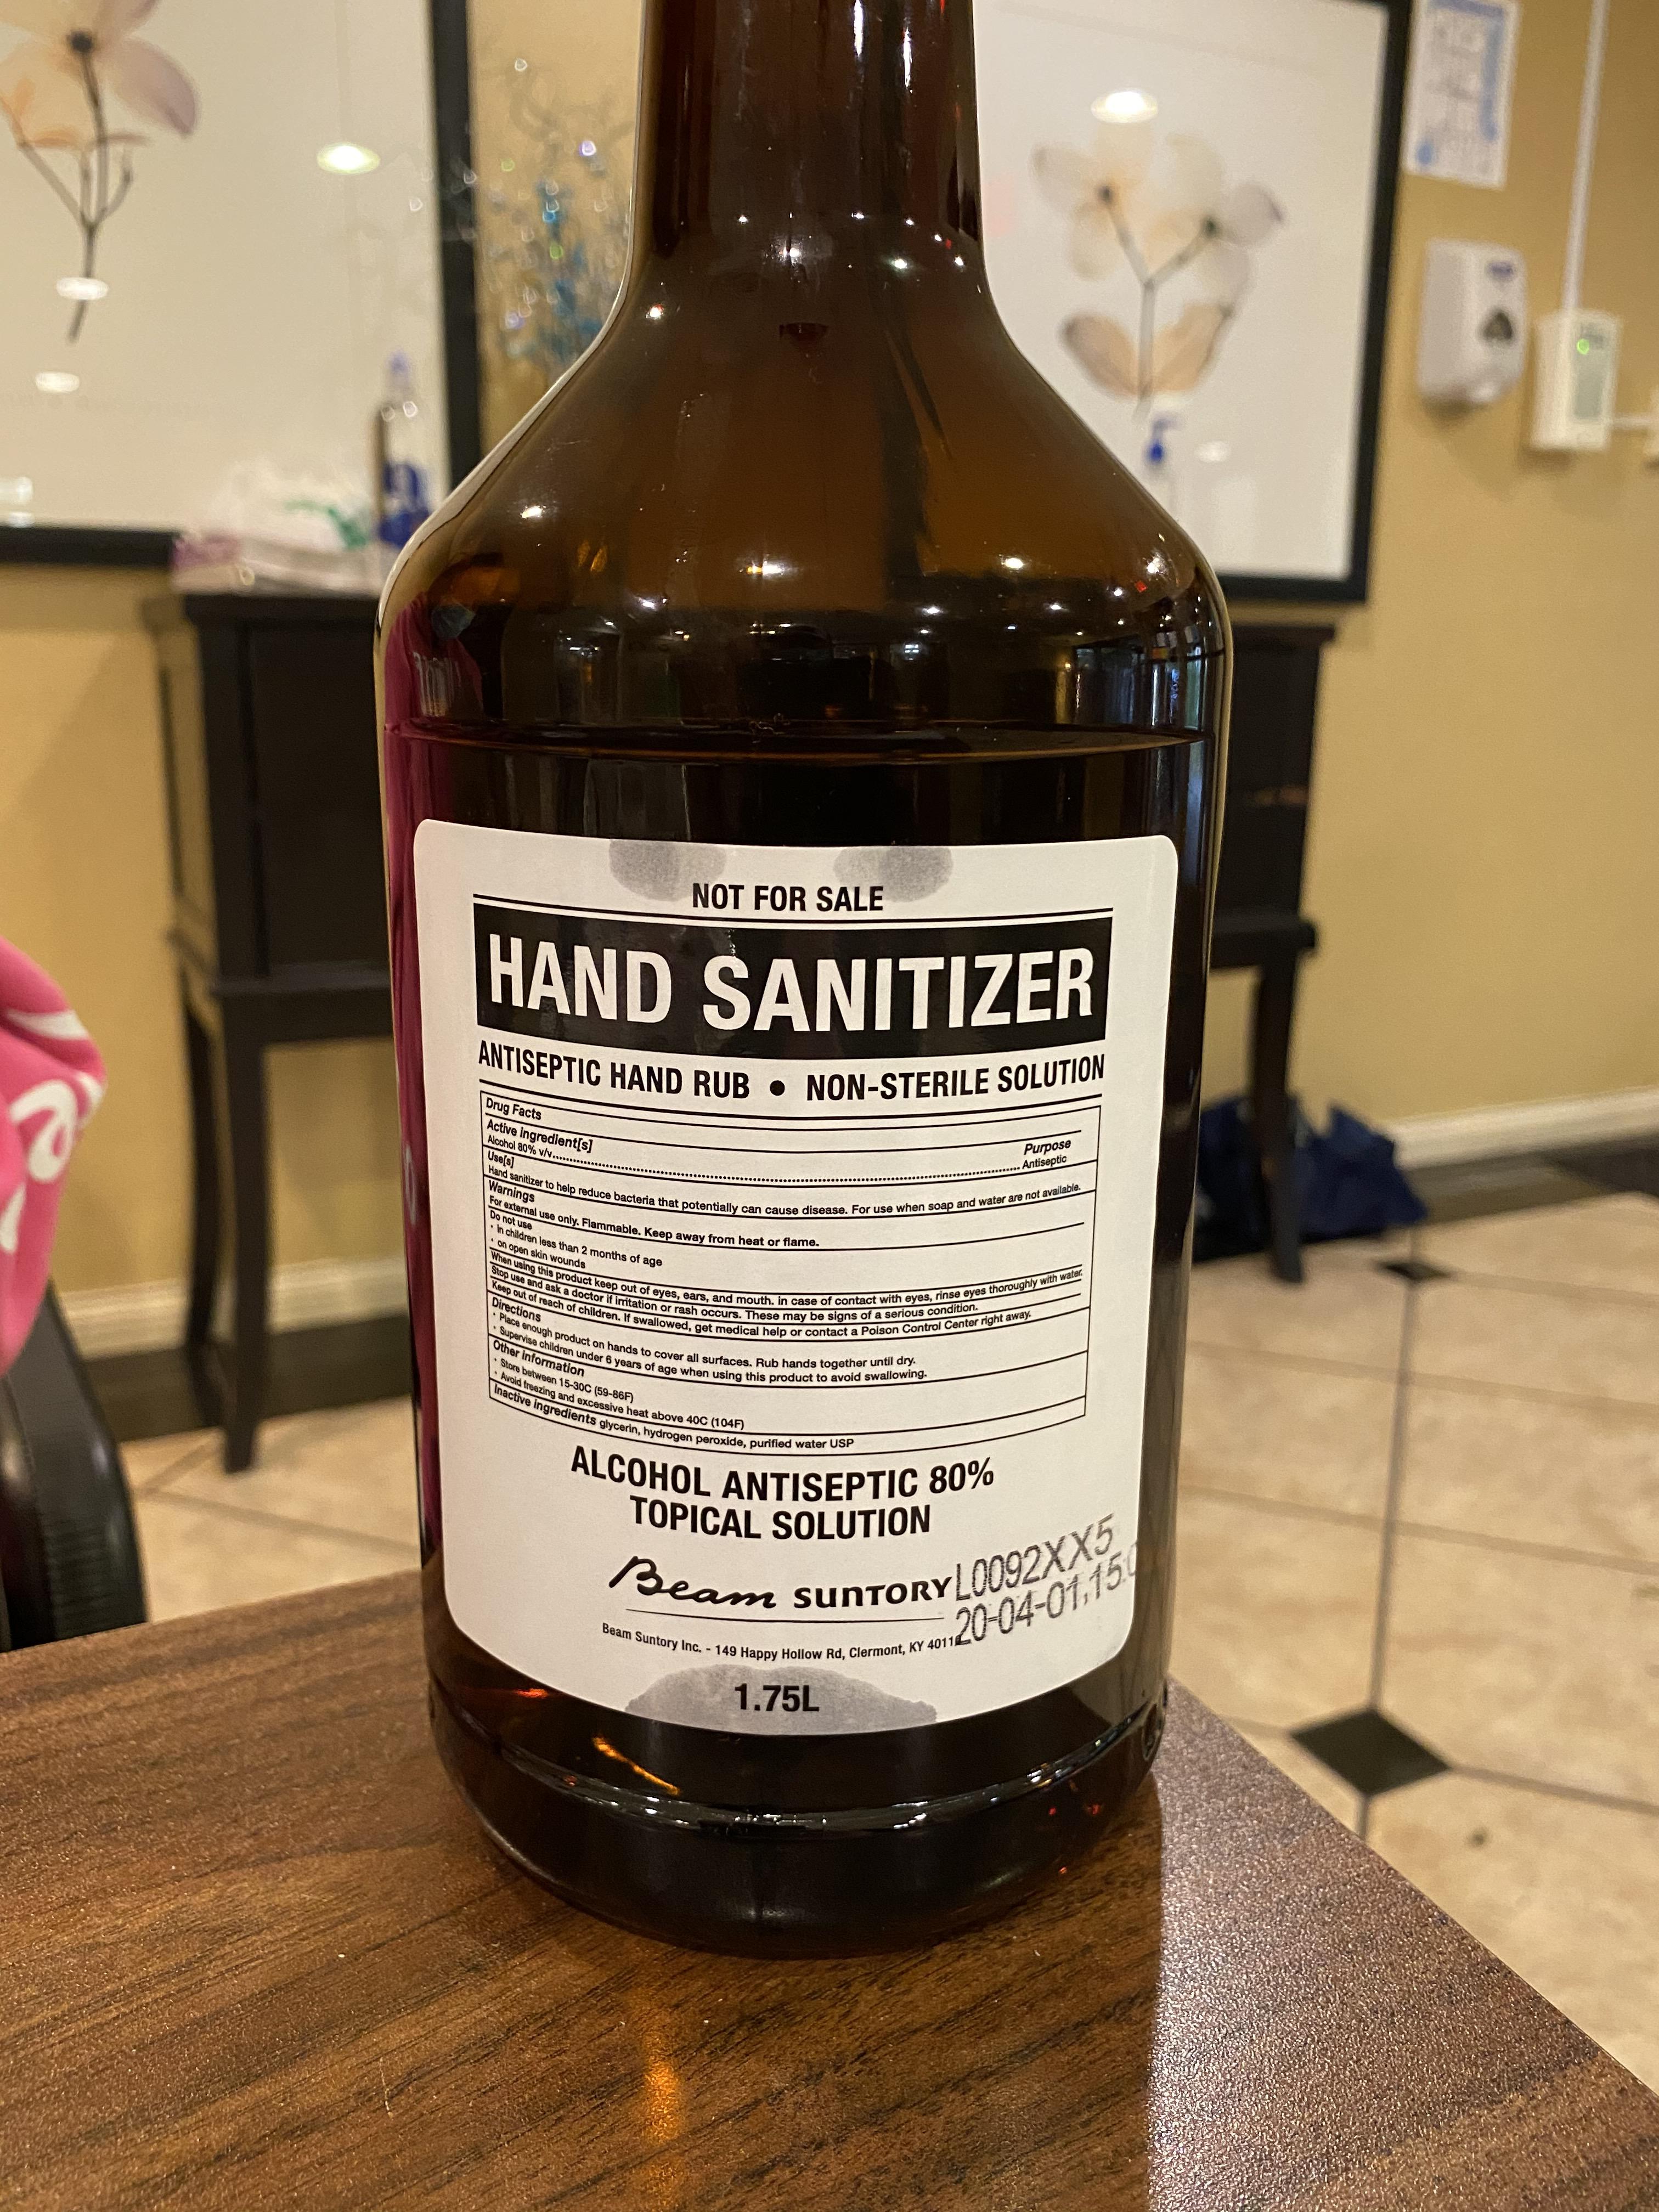 Kentucky health workers received sanitizer from the local distilleries. A fine year of Jim Beam Suntory.